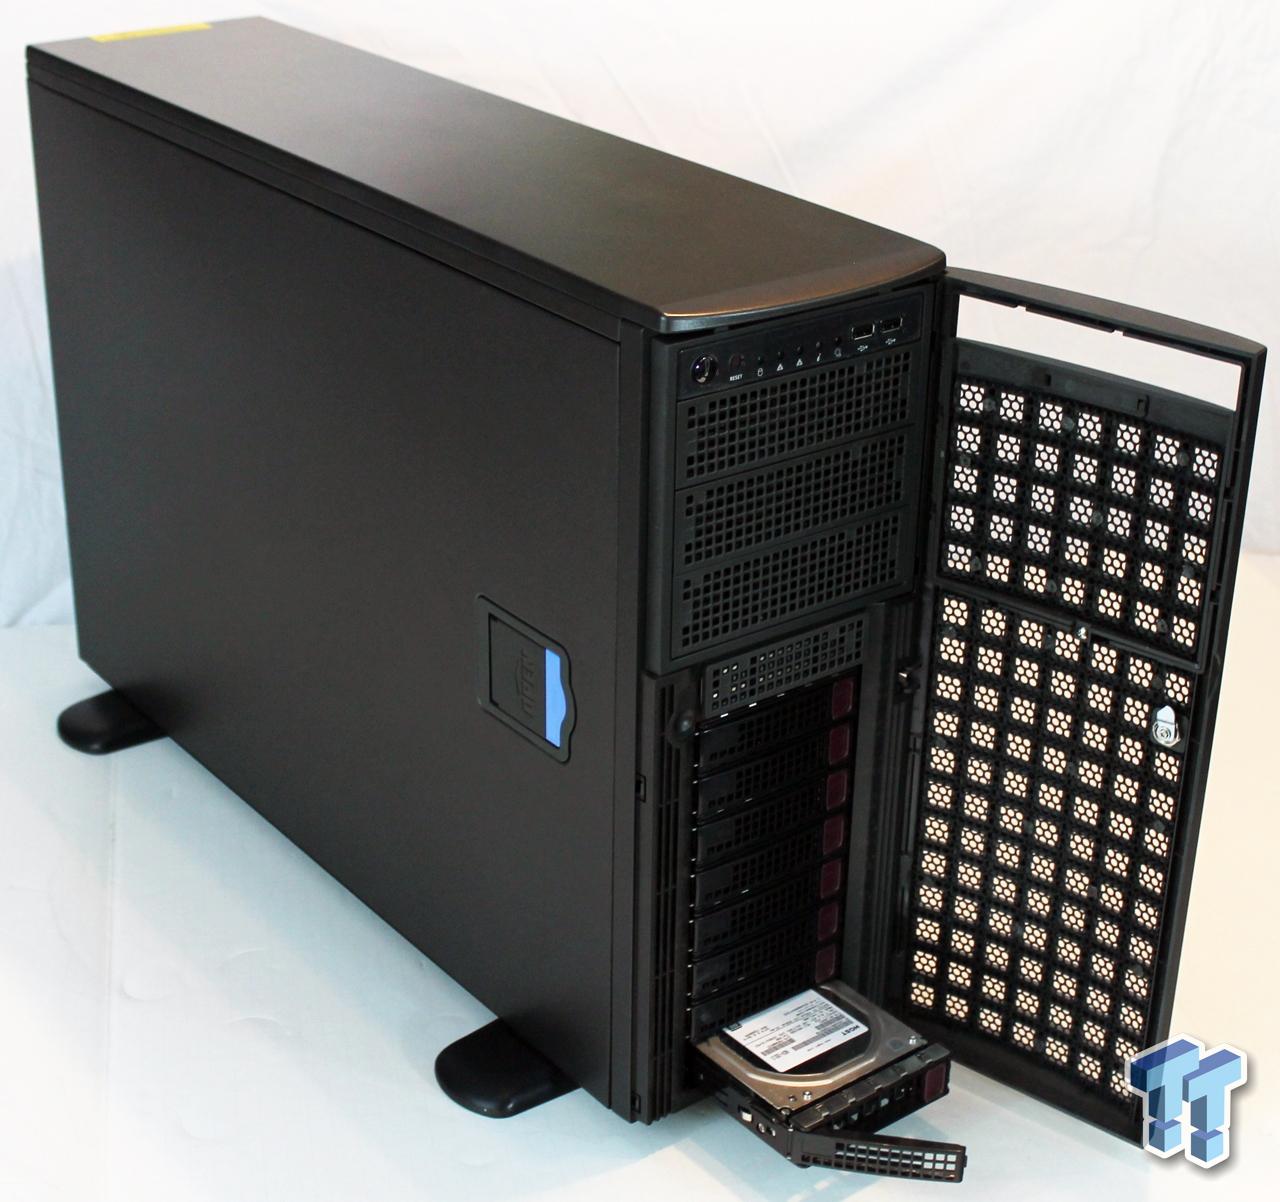 Supermicro 7048GR-TR (Intel C612) Workstation Tower System Review